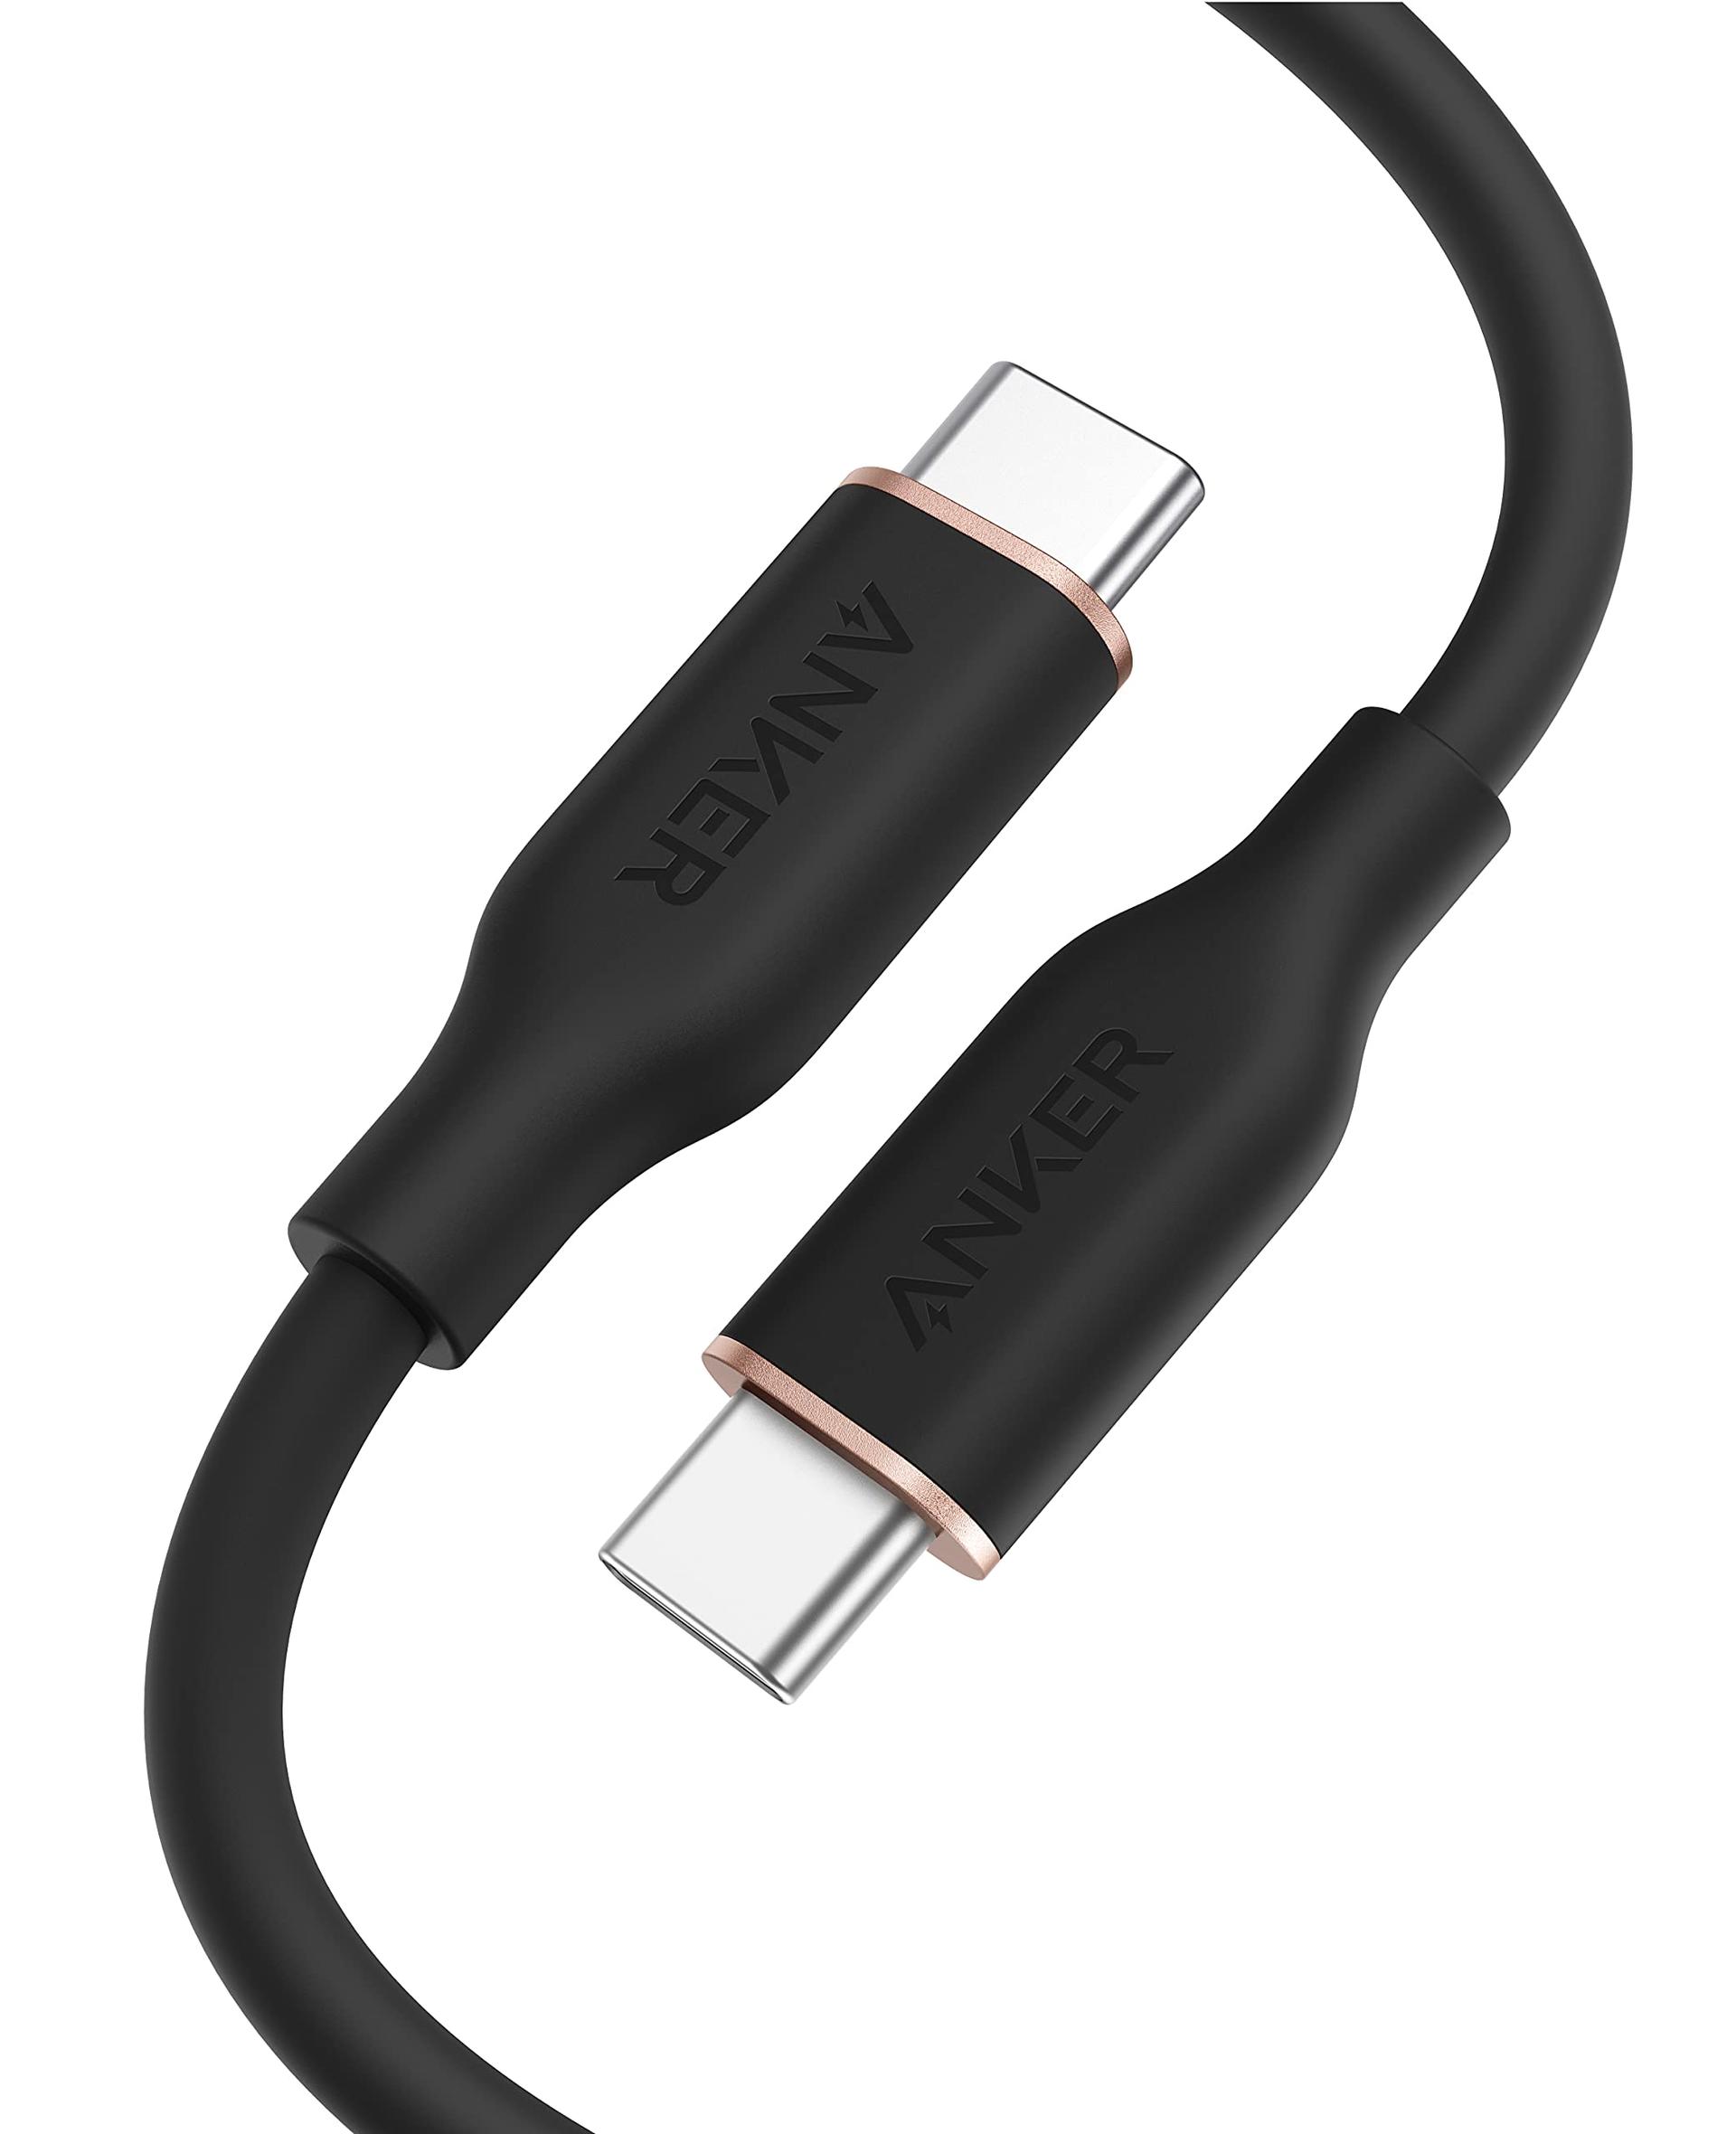 Anker <b>643</b> USB-C to USB-C Cable (Flow, Silicone)